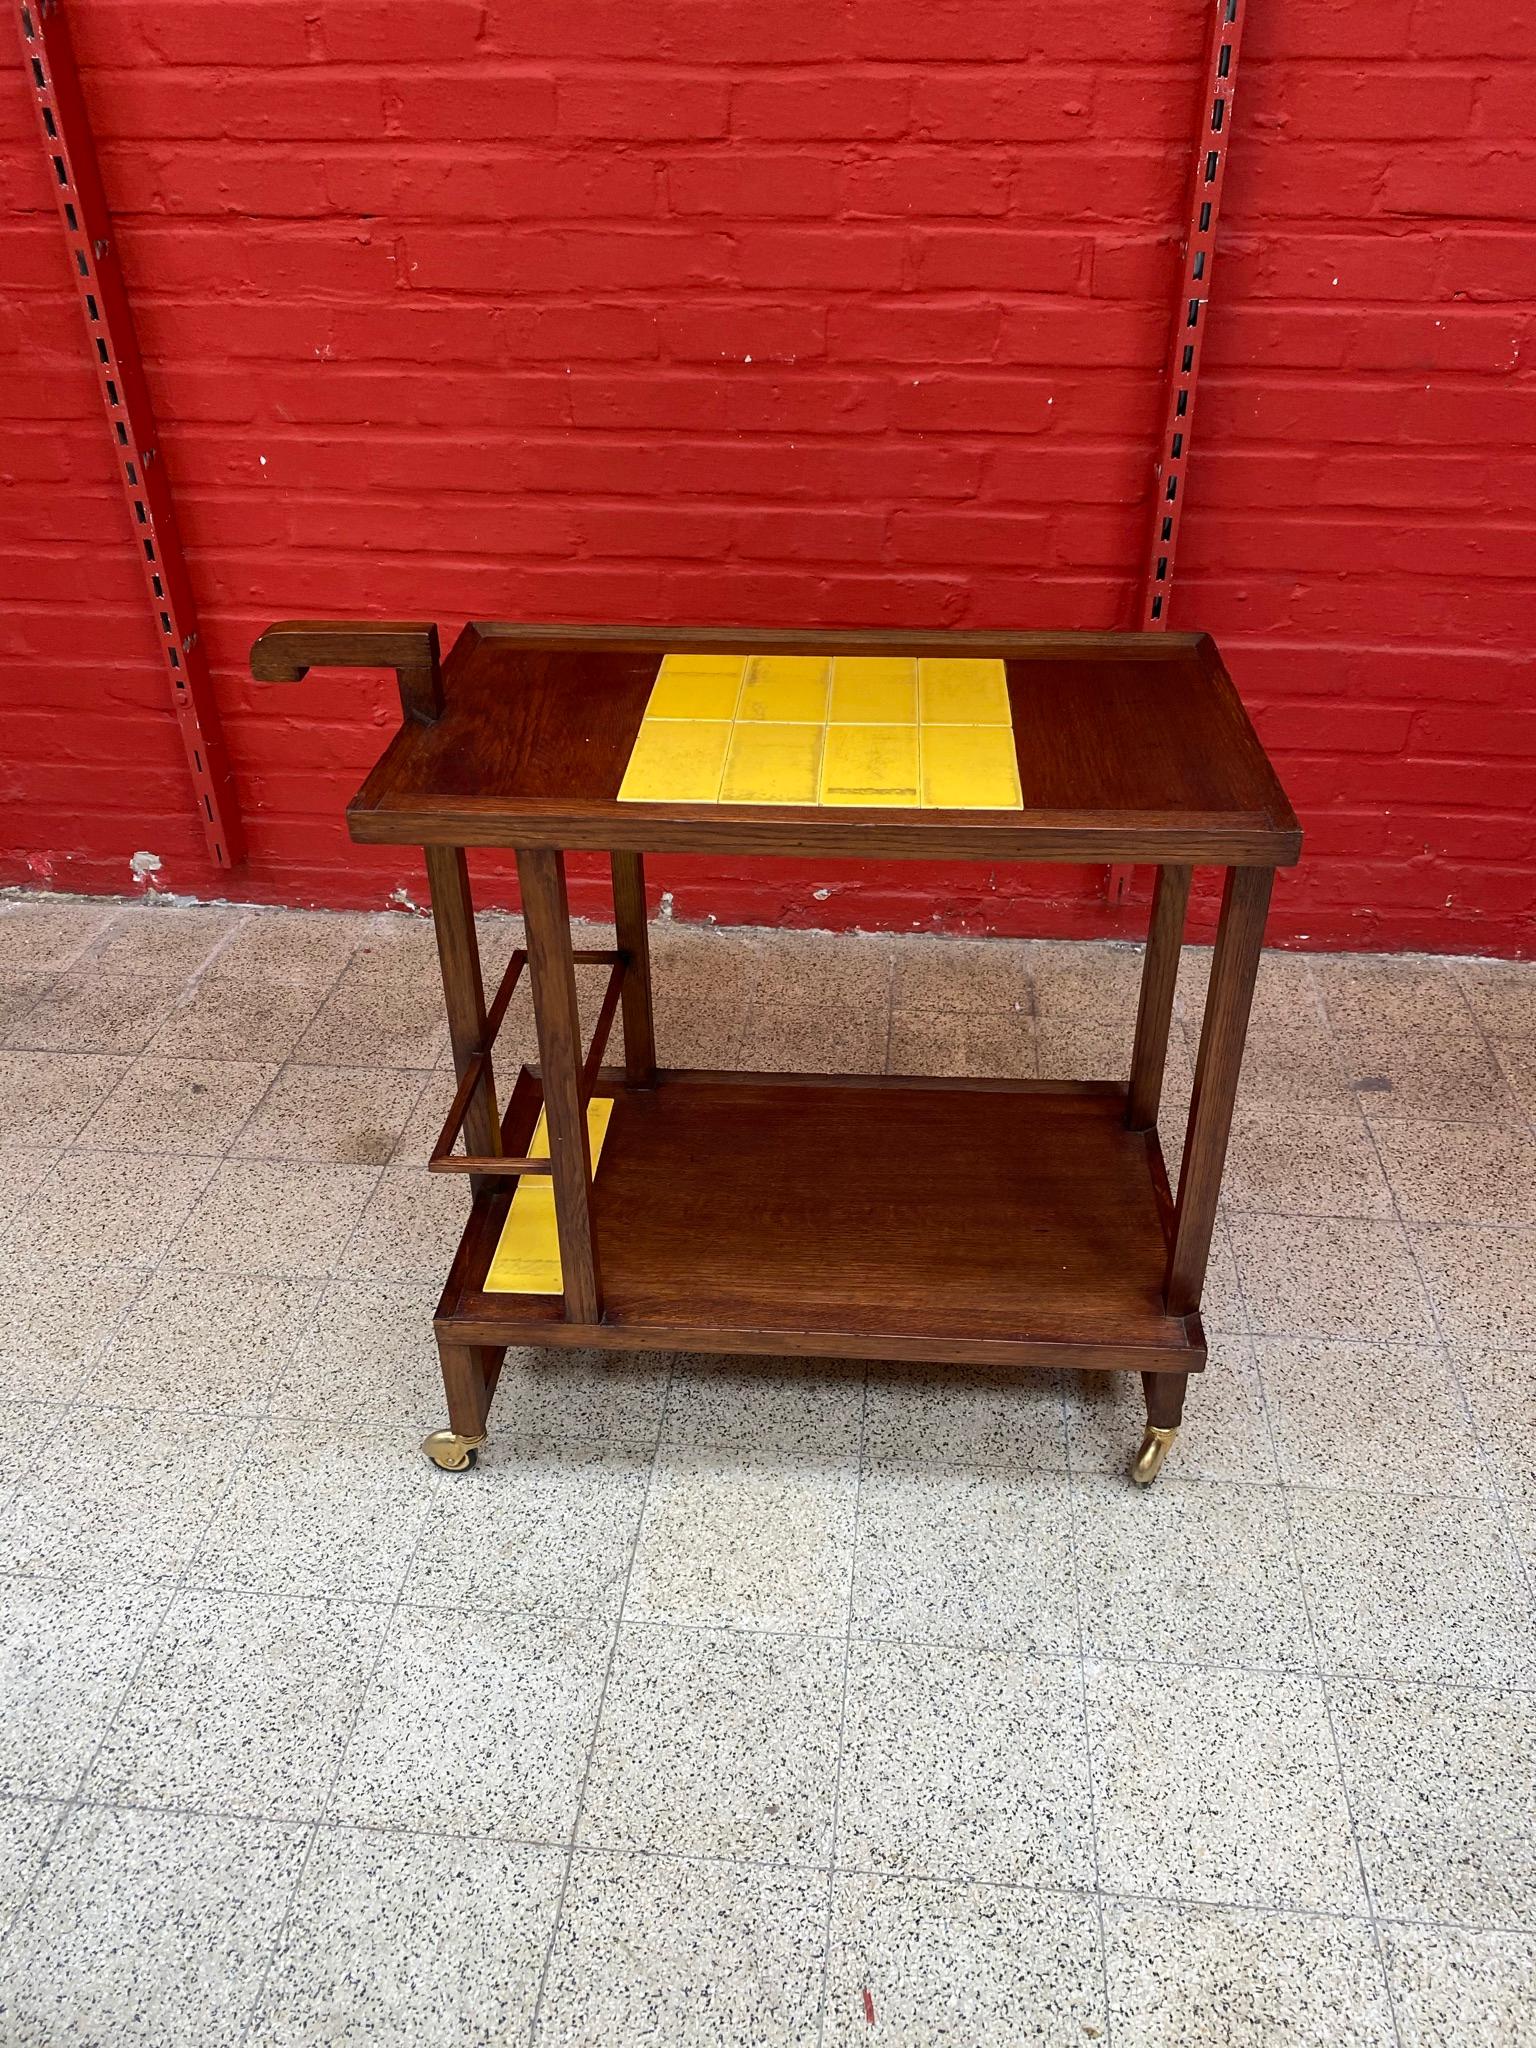 Mid-Century Modern Oak and Ceramic Trolley, Reconstruction Period, circa 1950 For Sale